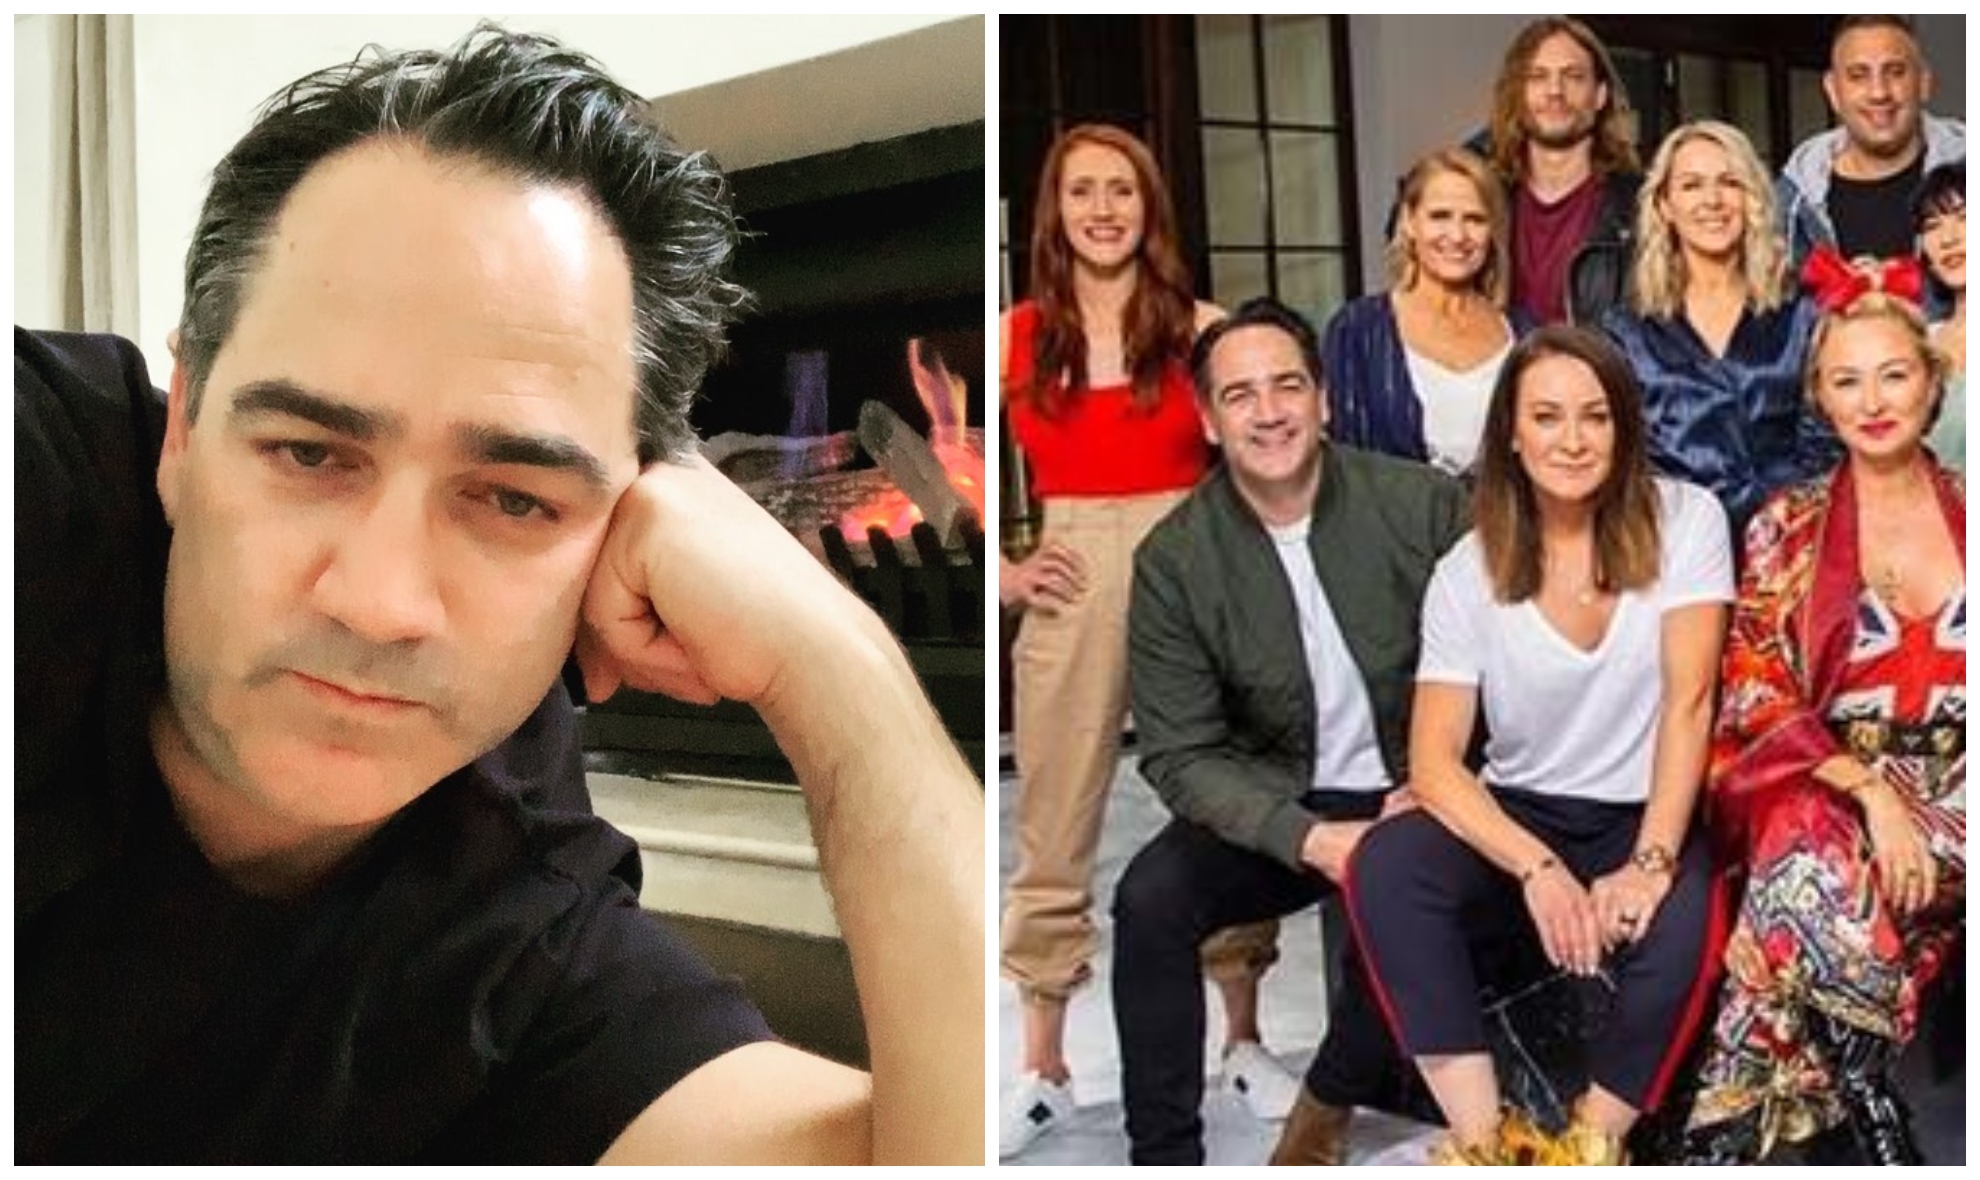 EXCLUSIVE: There was one, heartbreaking reality that almost broke Wippa while he filmed Celebrity Apprentice